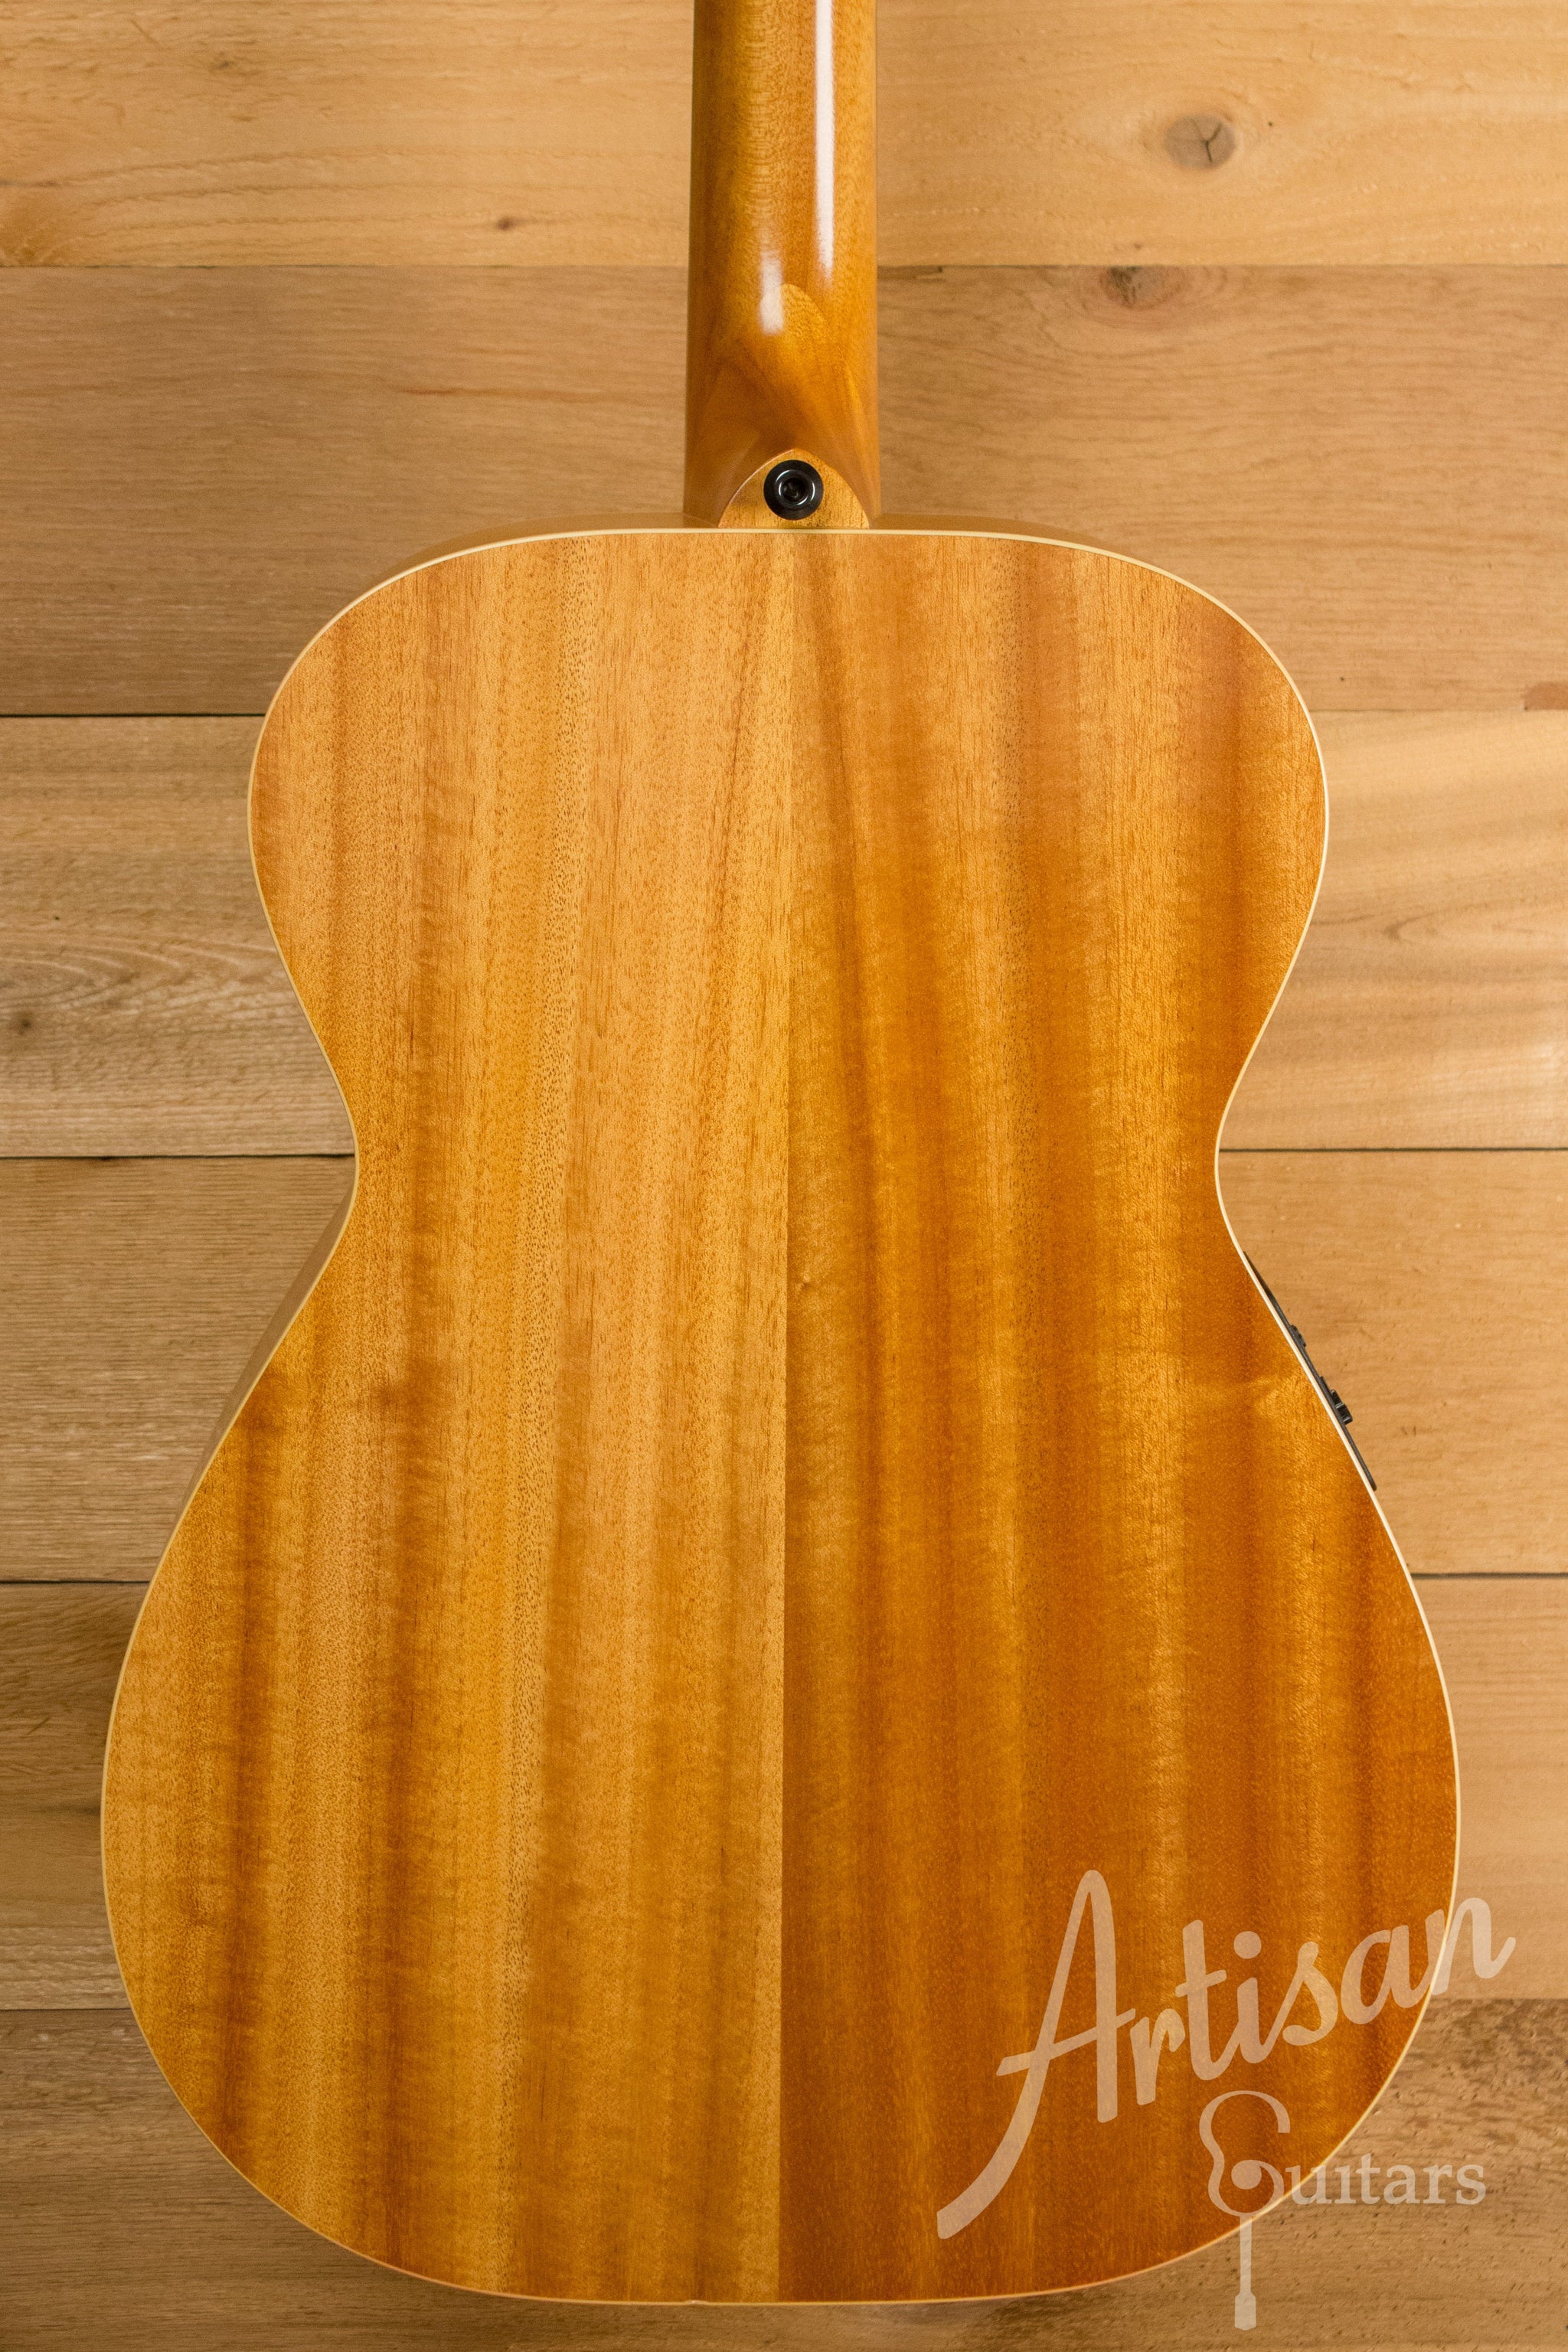 Maton EBG808TE Tommy Emmanuel Signature Sitka and Queensland Maple Pre-Owned 2011 ID-11130 - Artisan Guitars